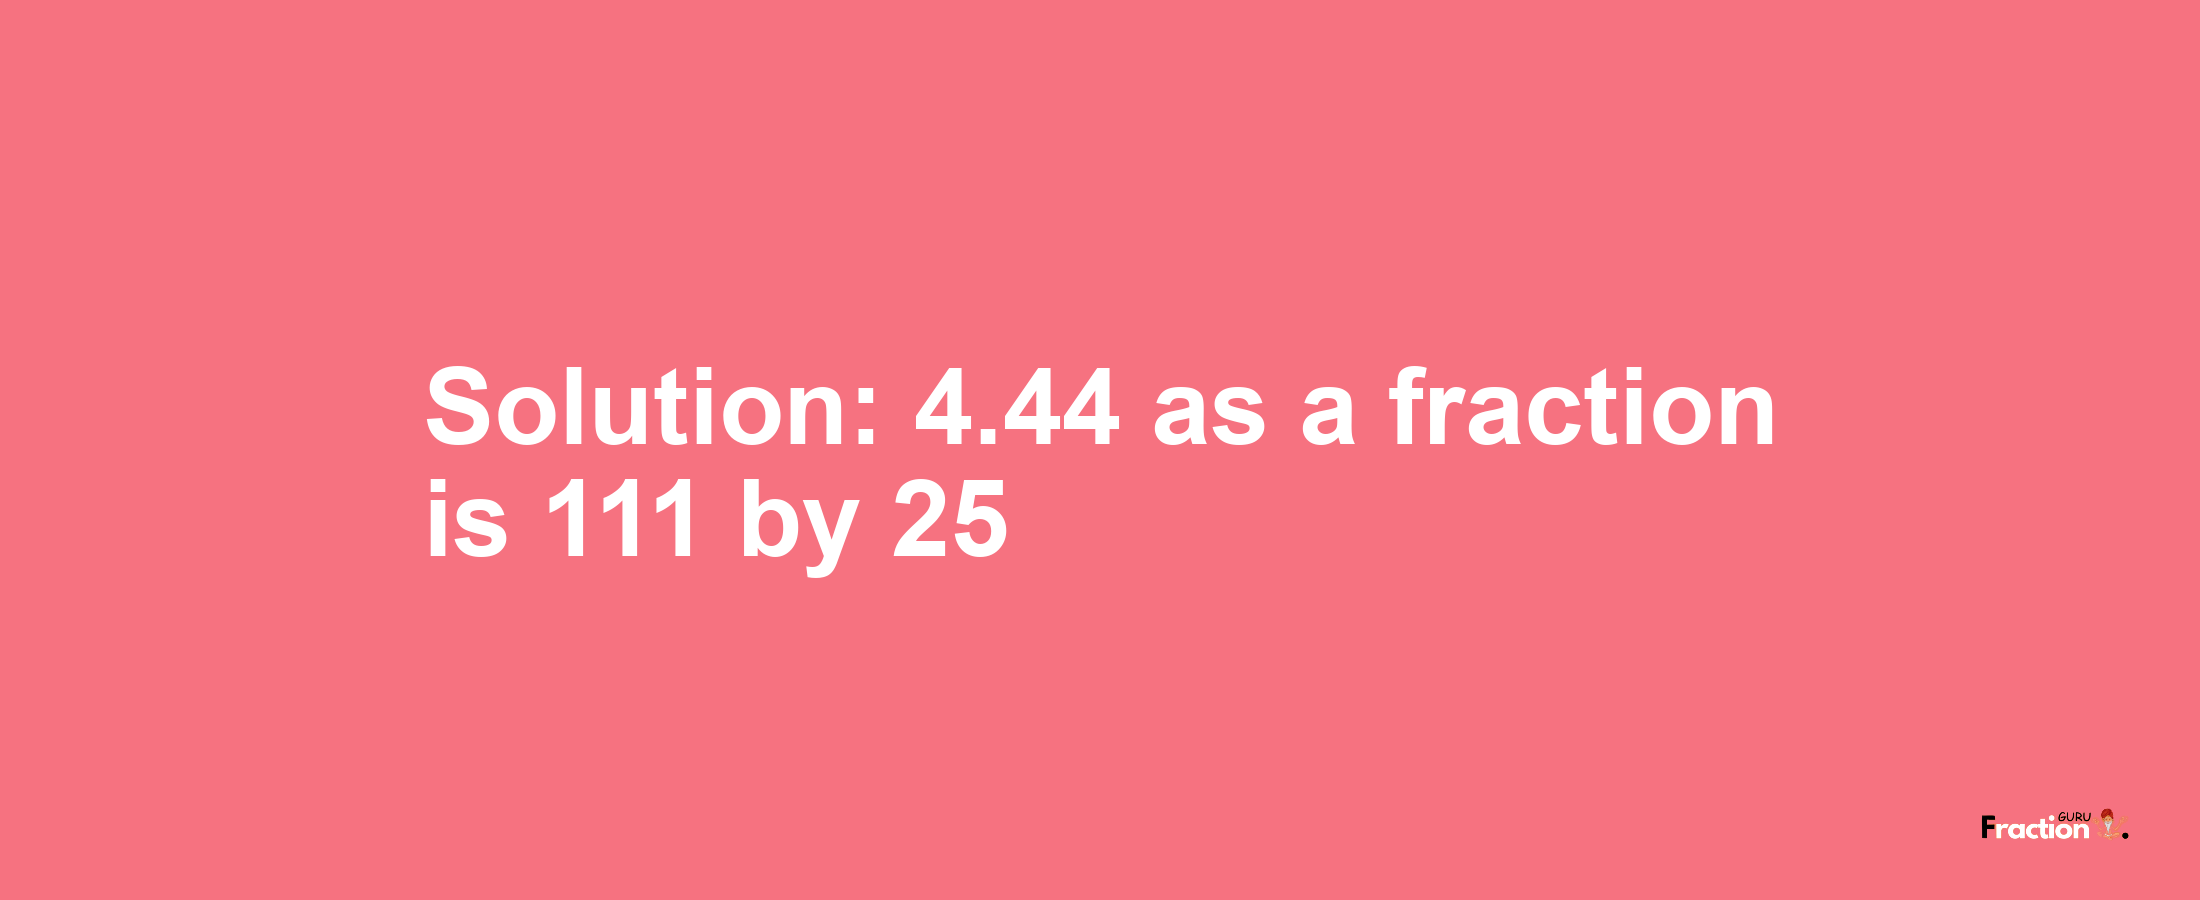 Solution:4.44 as a fraction is 111/25